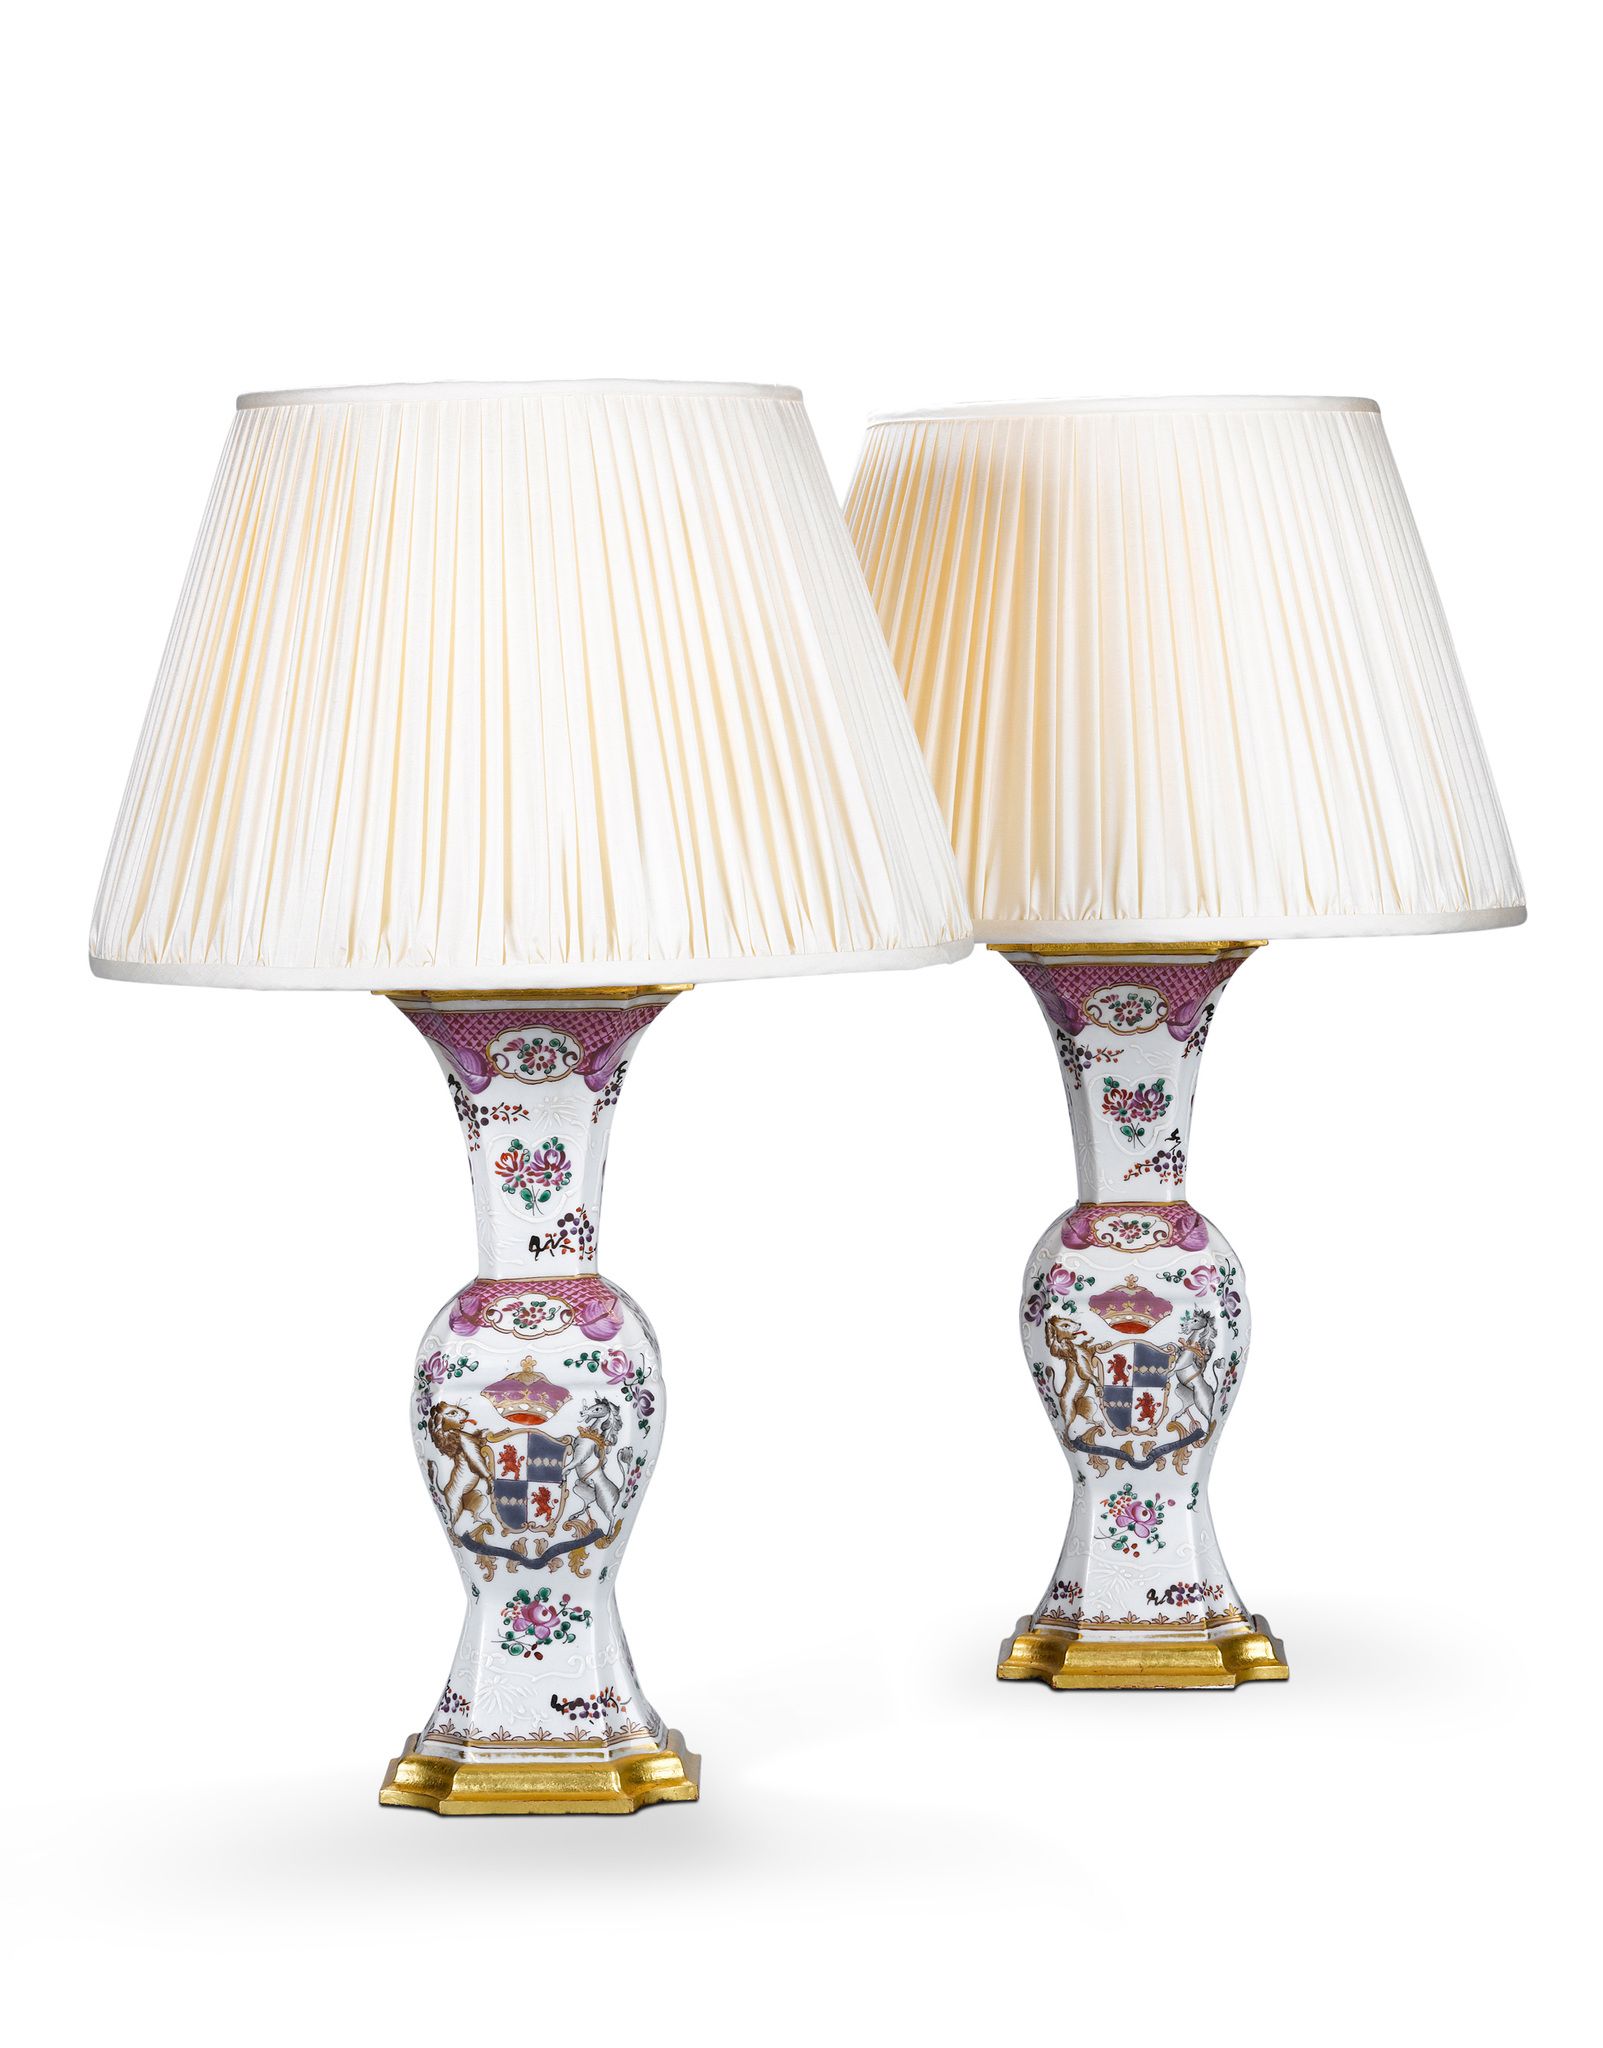 A Pair of Chinese Style Samson Vases Mounted as Lamps France circa 1870, the front face decorated